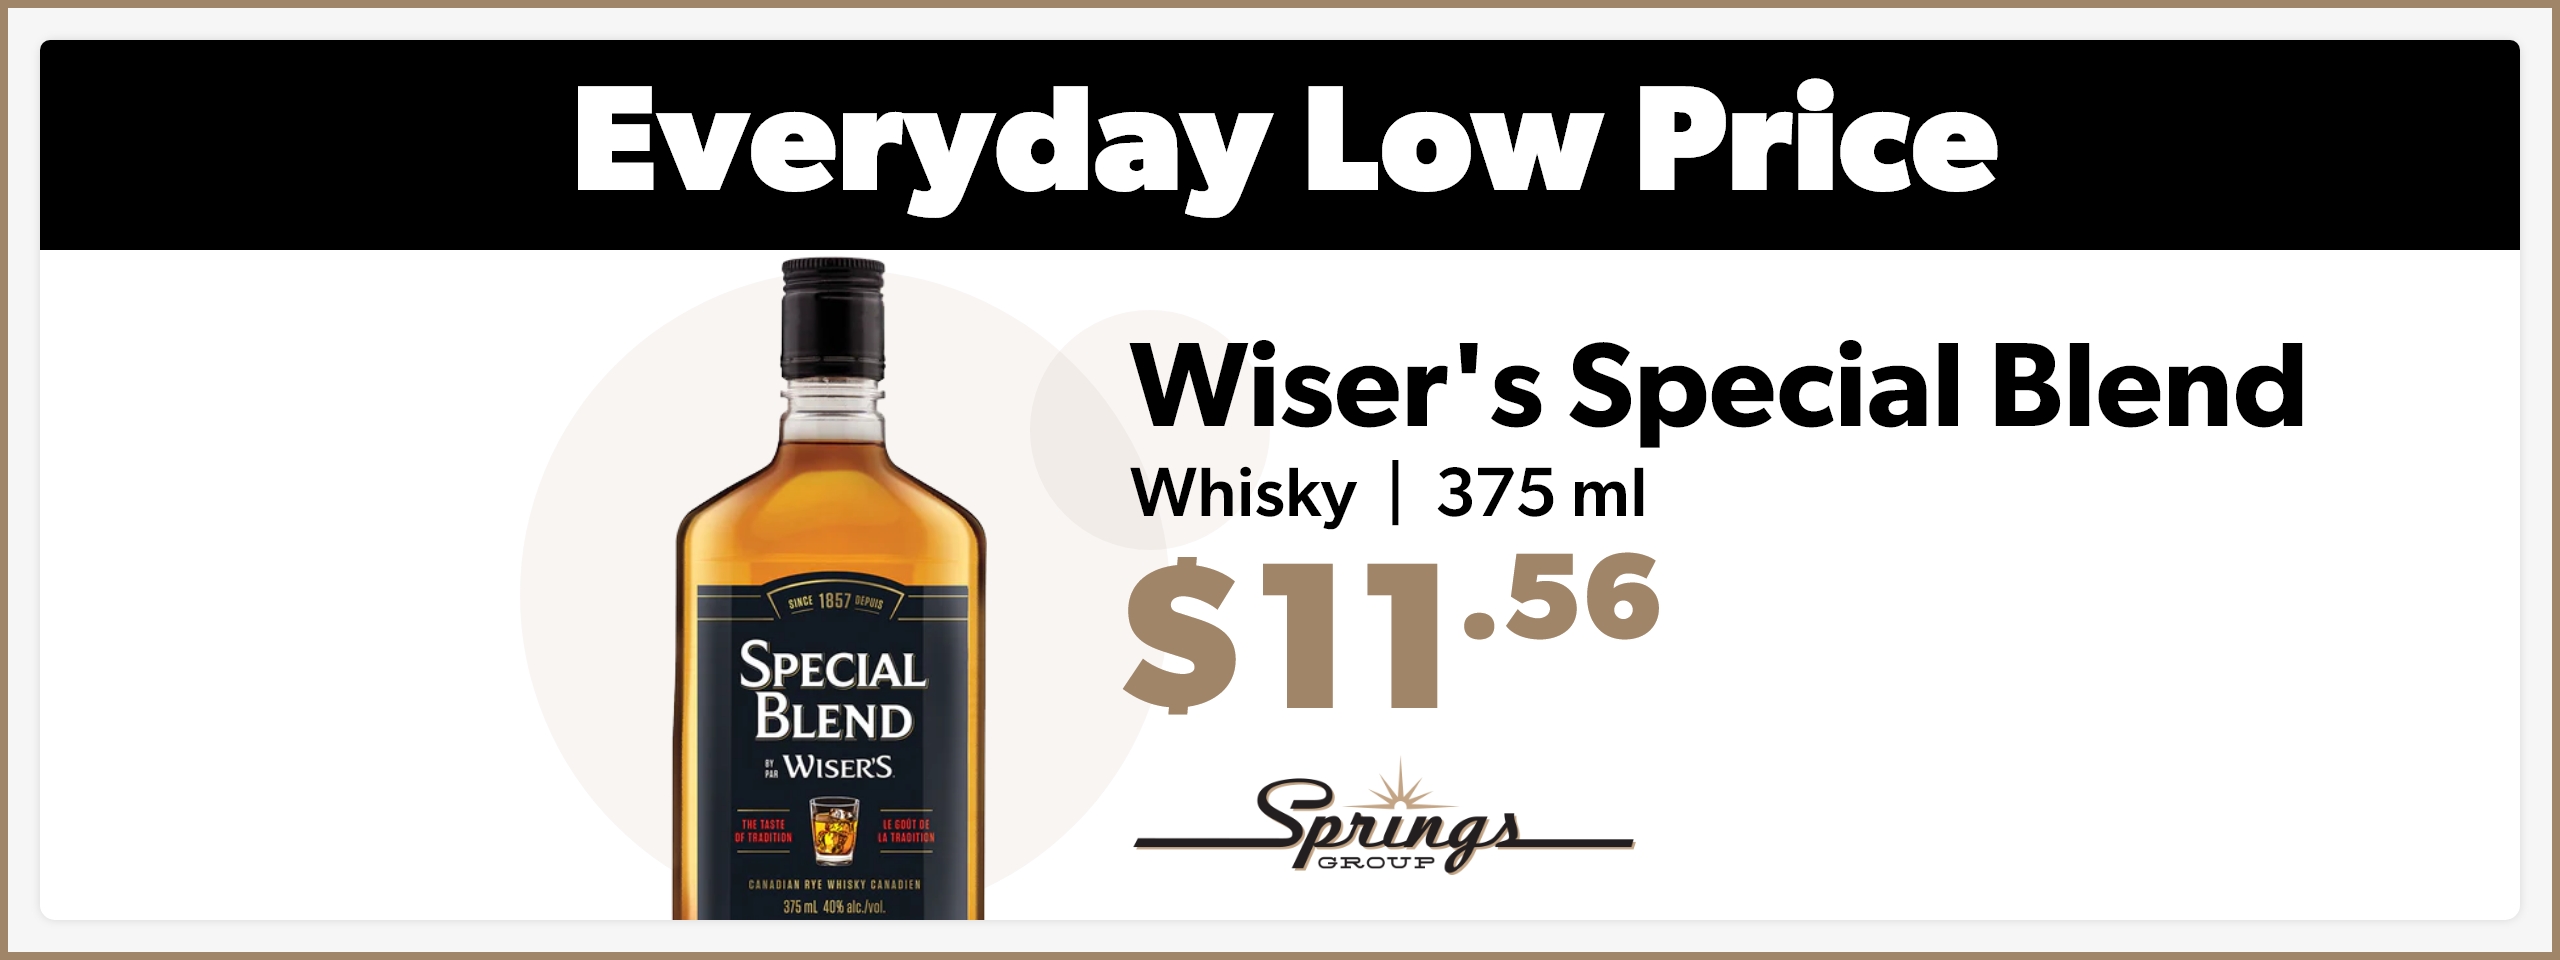 Wisers Special - 375ml EDLP